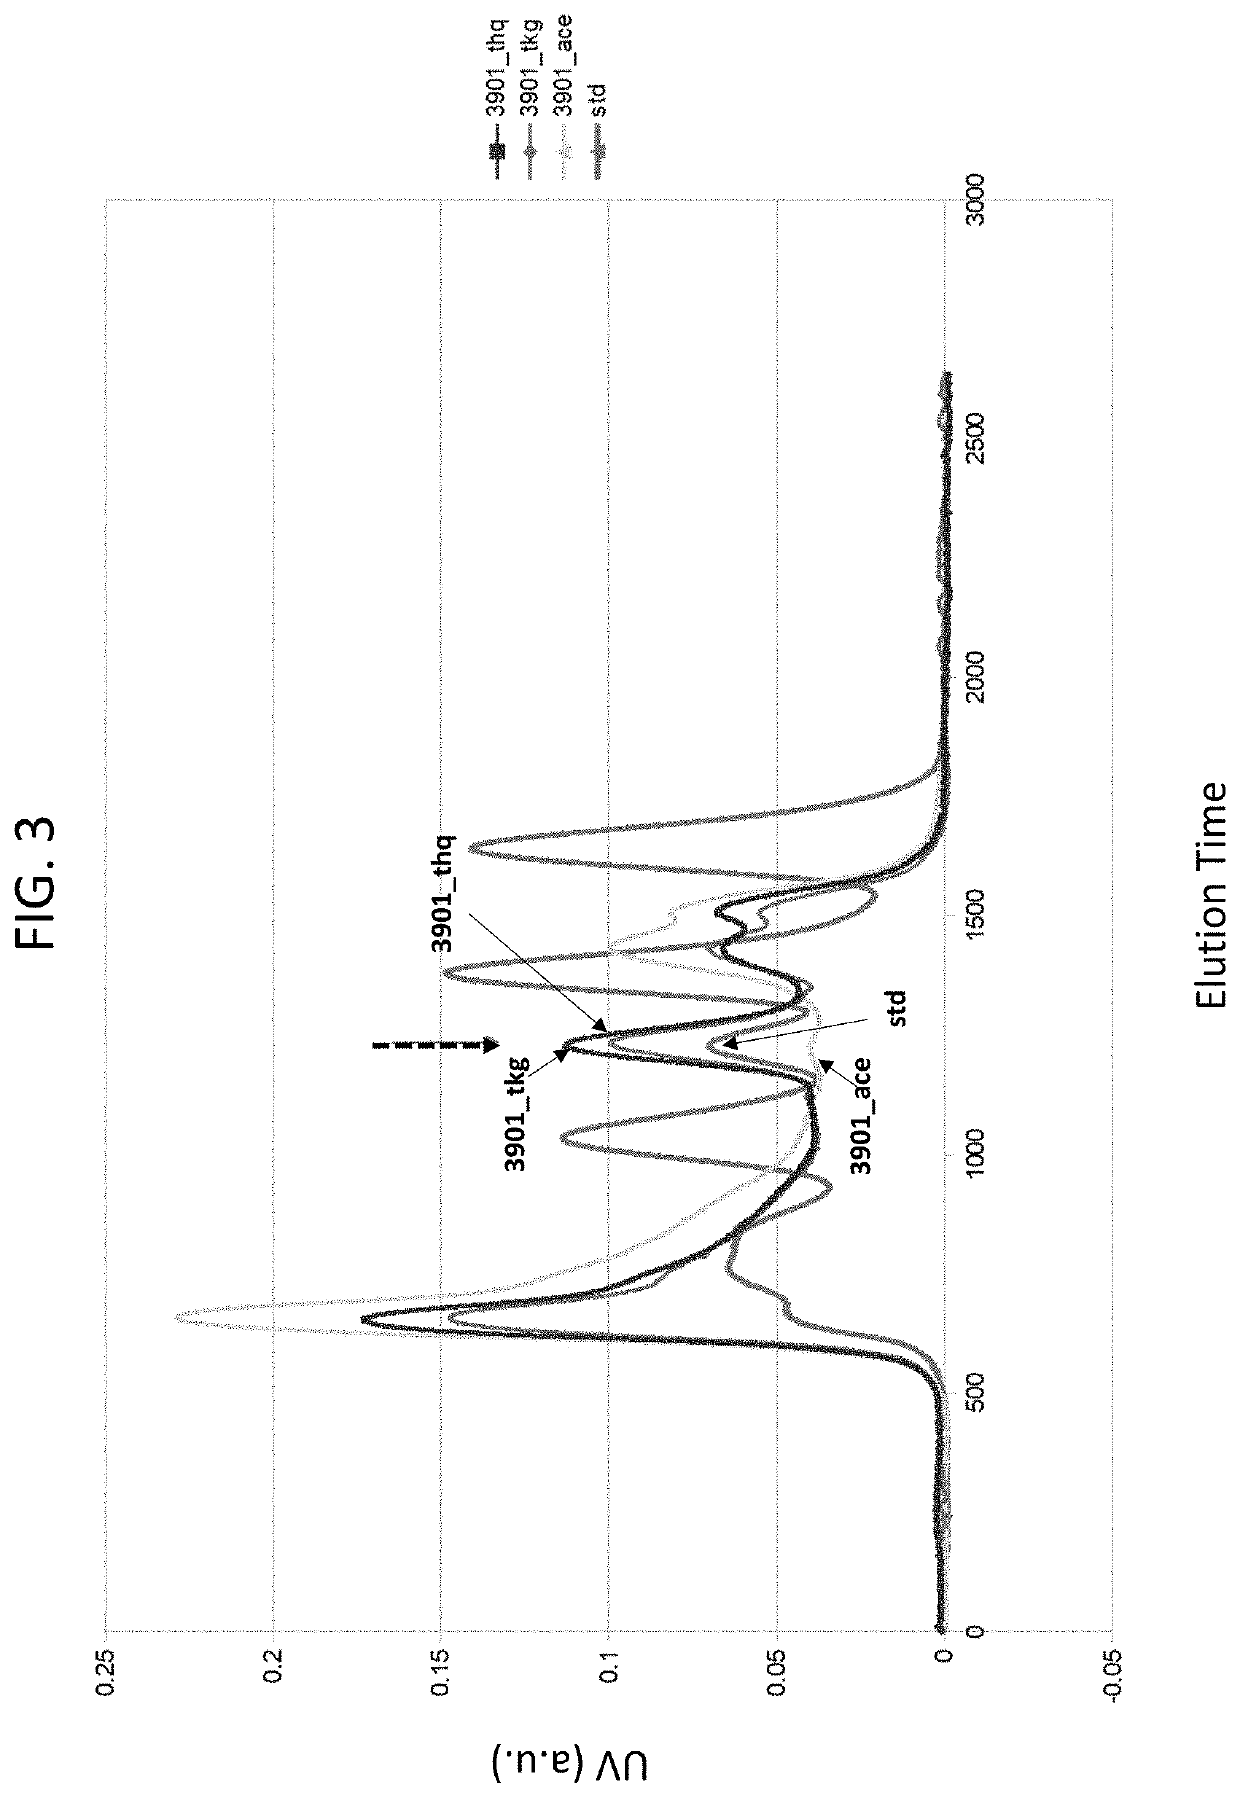 Methods for treating disease and reducing drug-induced liver injury in patient populations